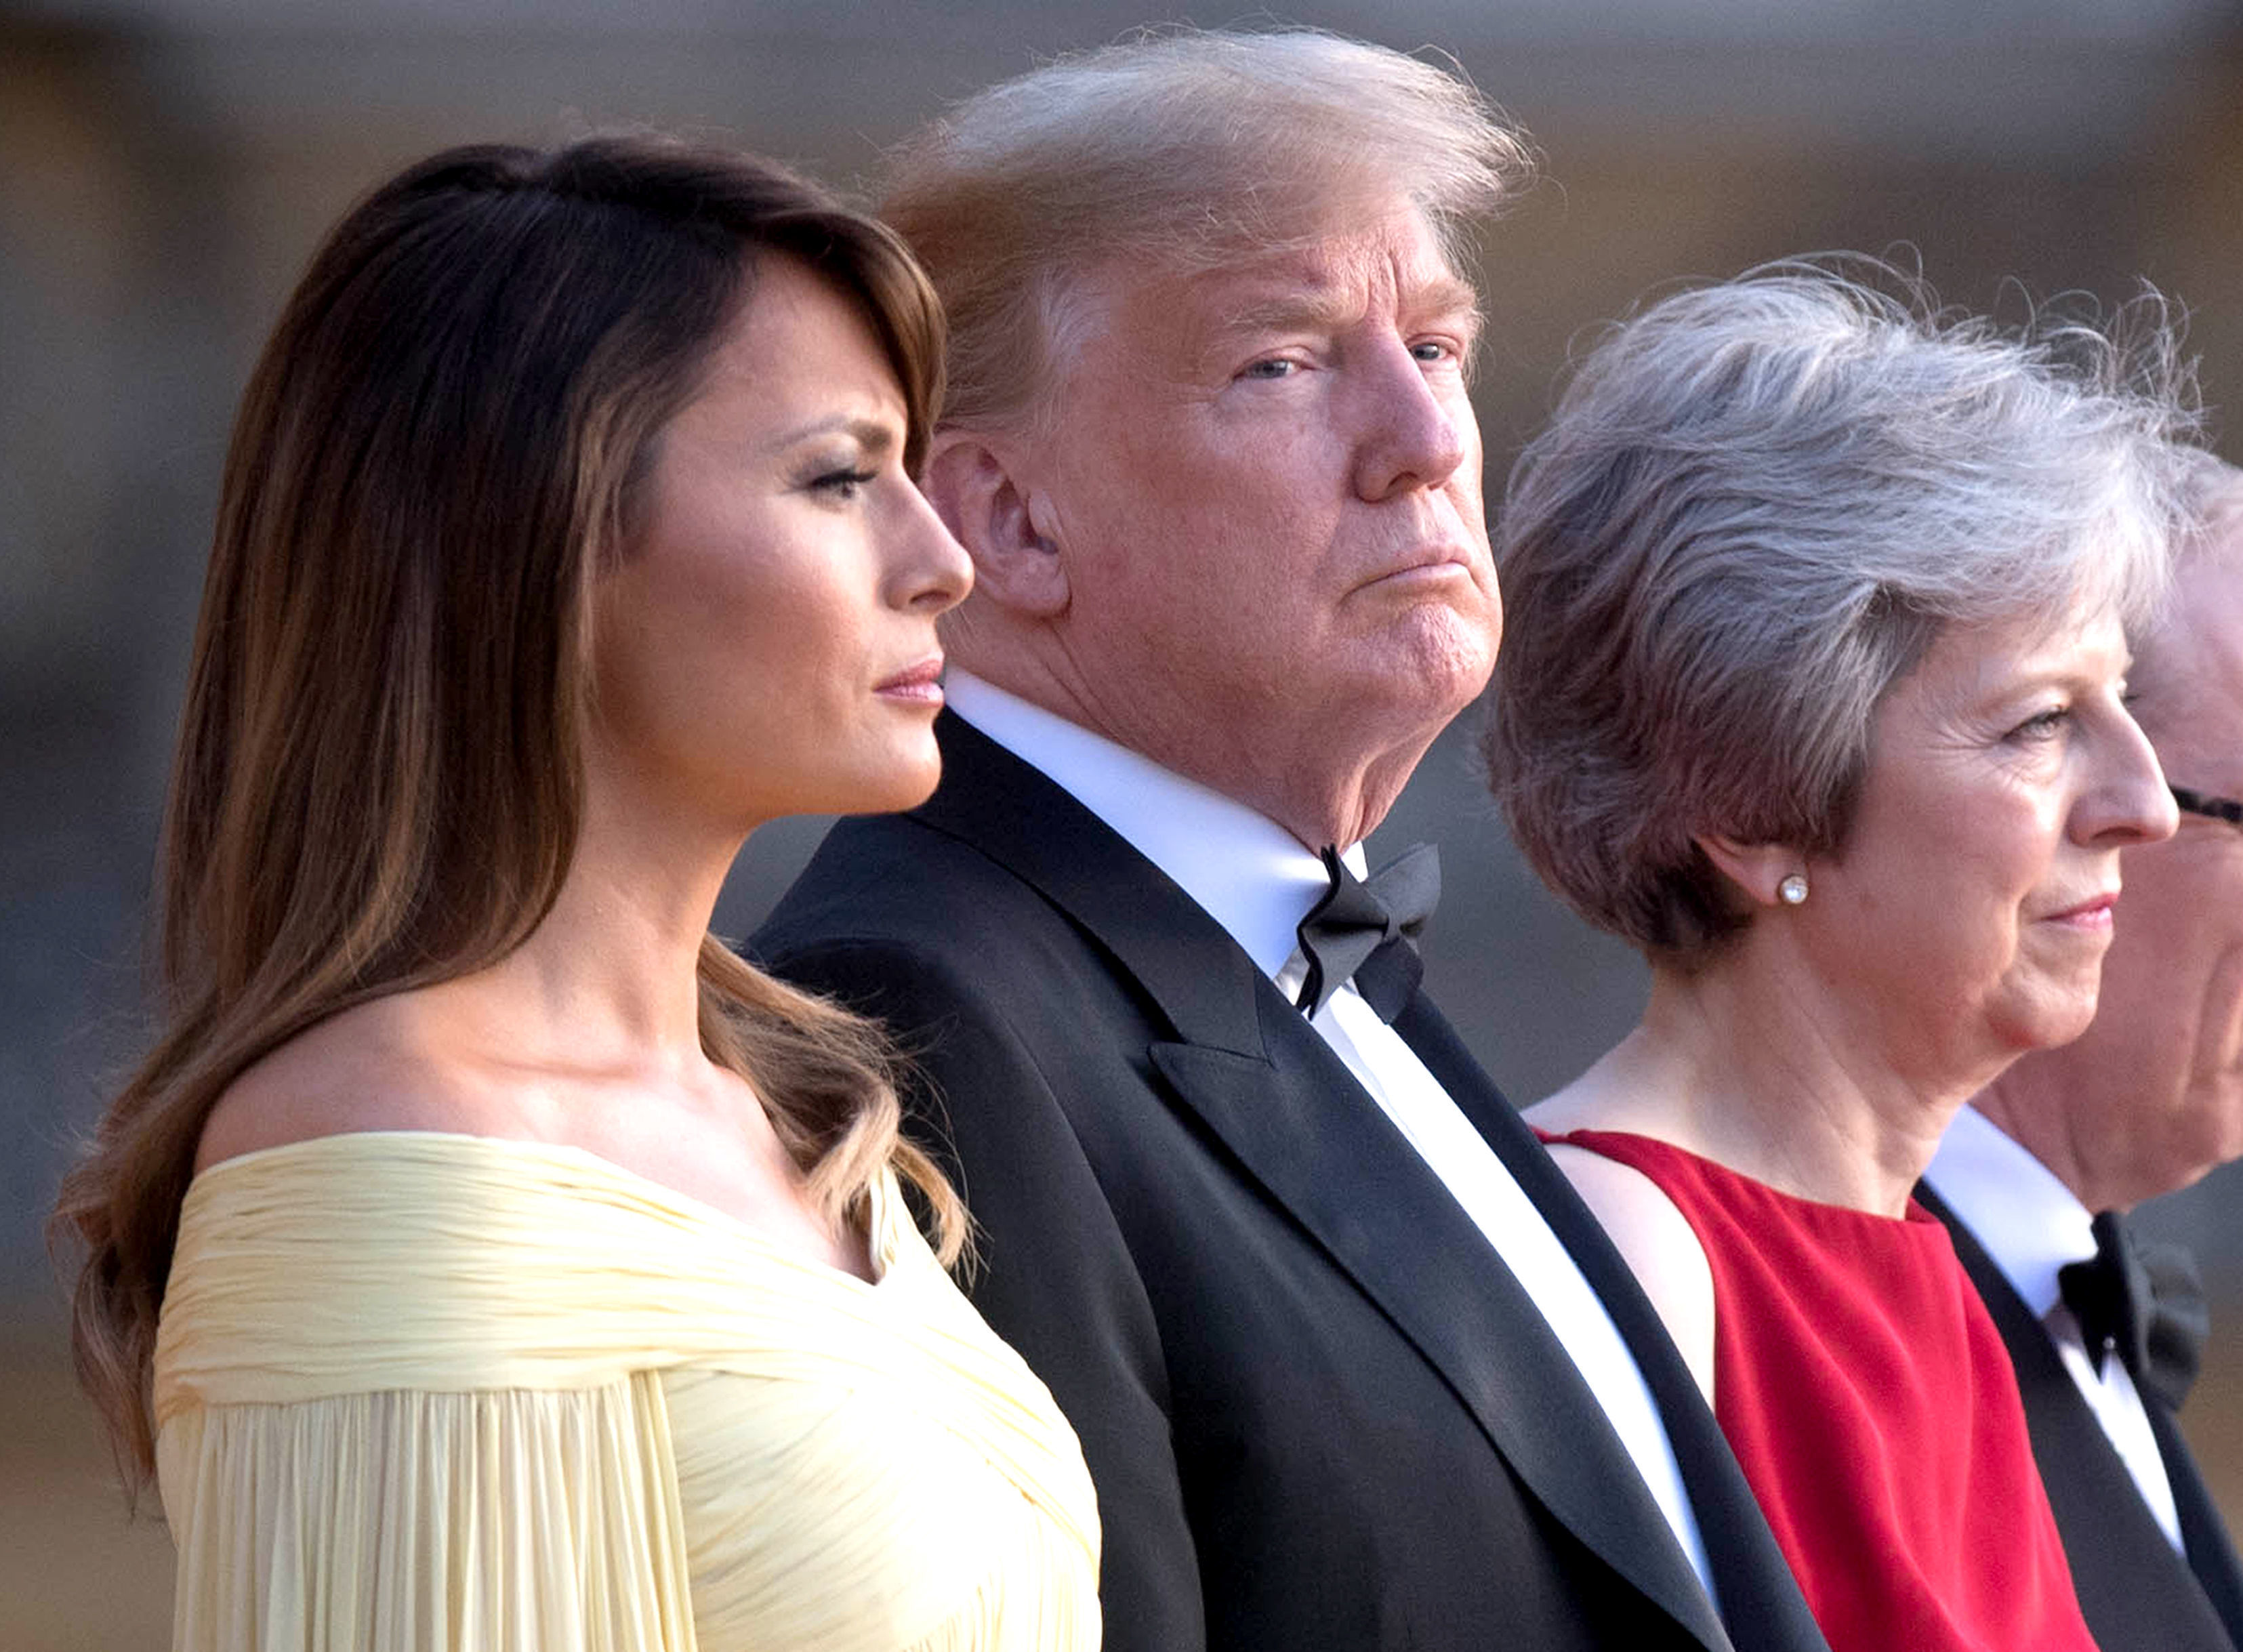 US President Donald Trump and his wife Melania are welcomed by Prime Minister Theresa May and her husband Philip May at Blenheim Palace